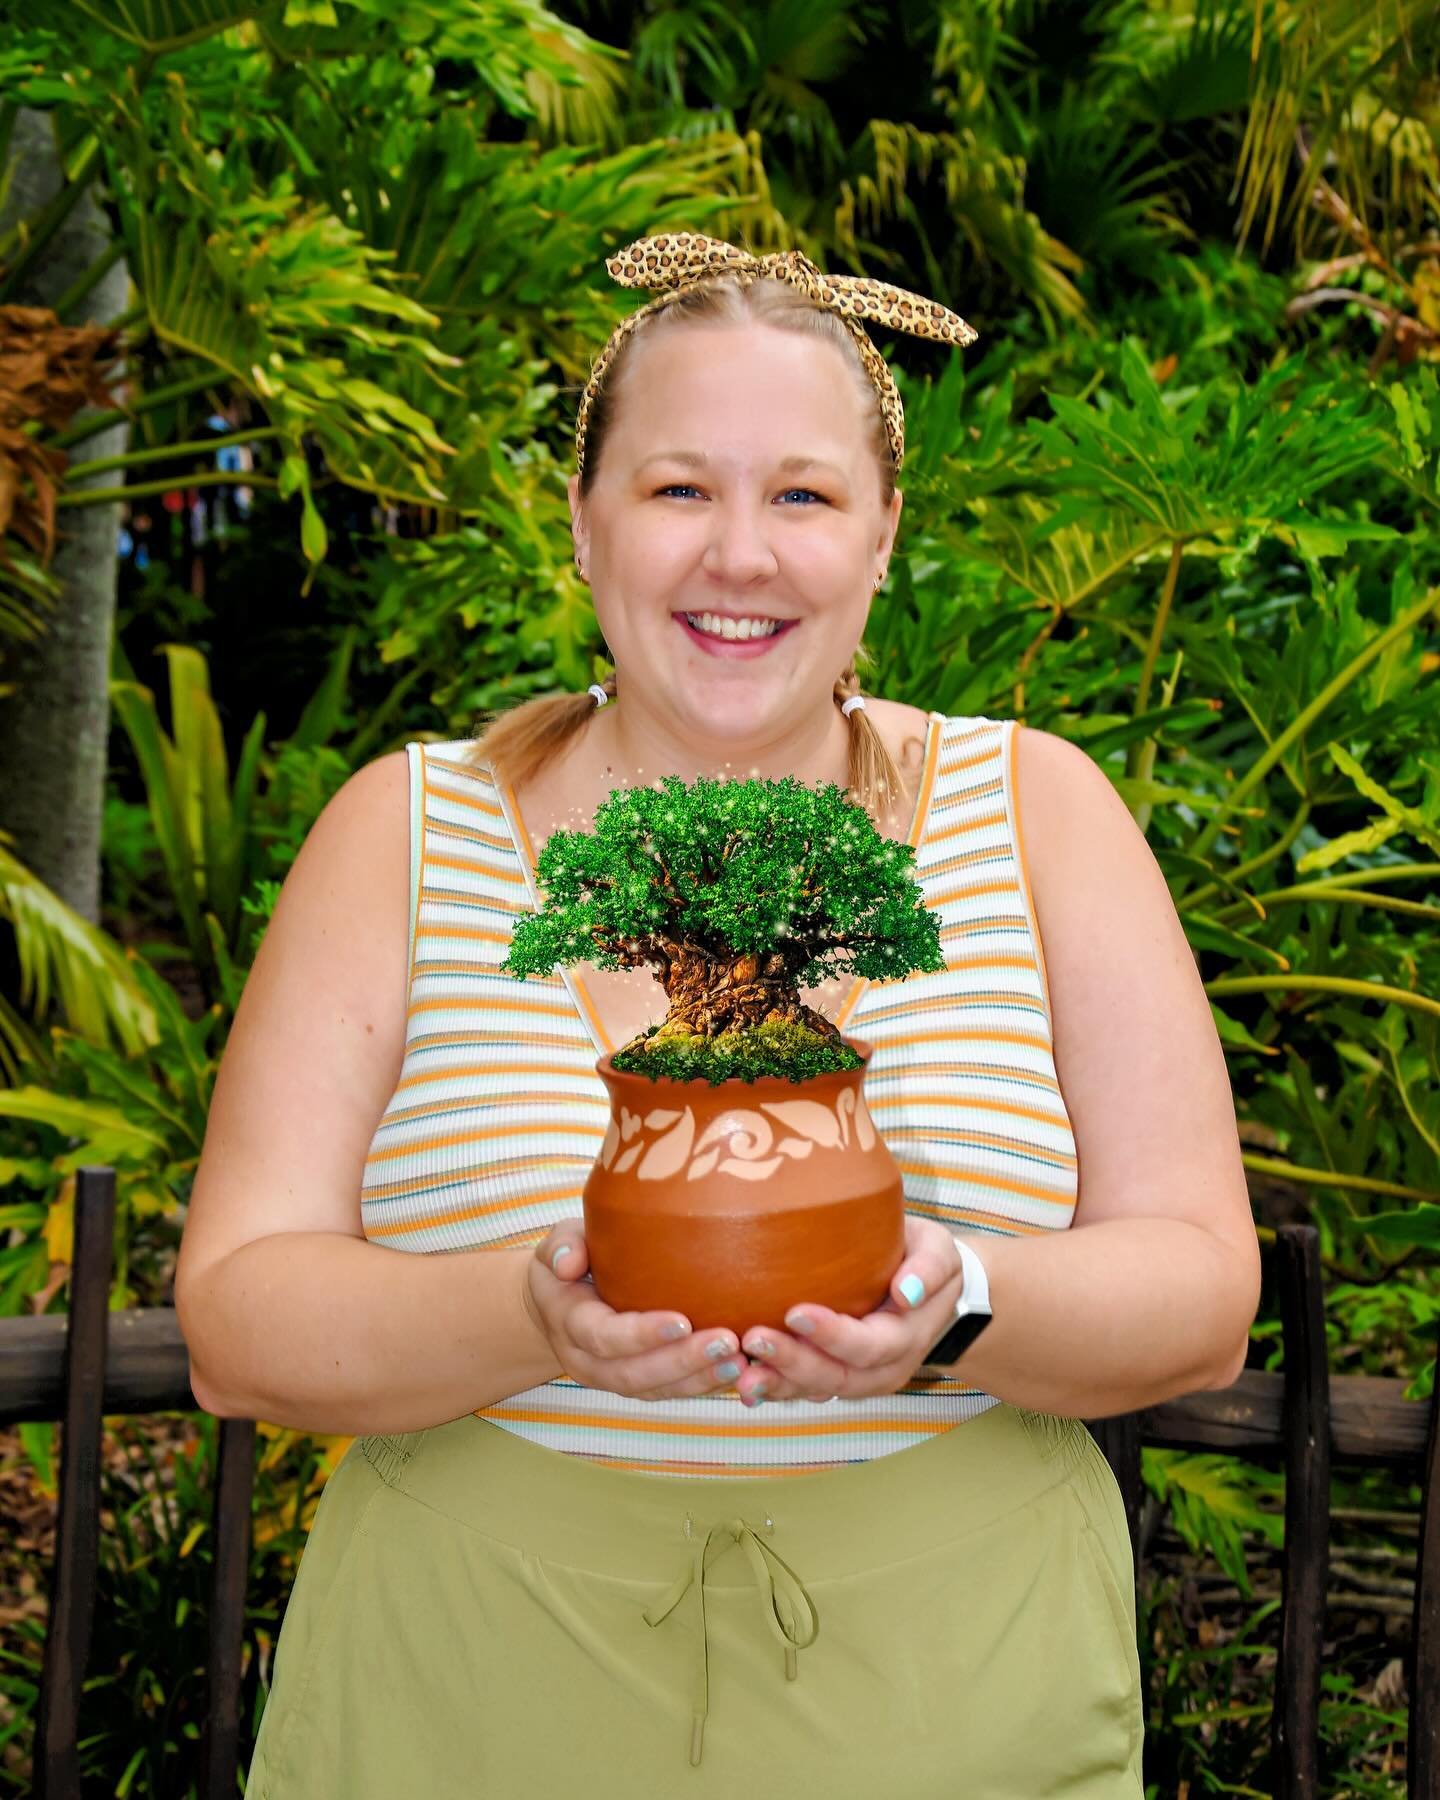 Happy Earth Day from Disney&rsquo;s Animal Kingdom! Tell me your fav way to celebrate in the comments. I&rsquo;ll go first &gt;&gt;&gt; we like to compost our food scraps to cut down on landfill waste.
.
#Disneytips #disneyhacks #disneyadvice #disney